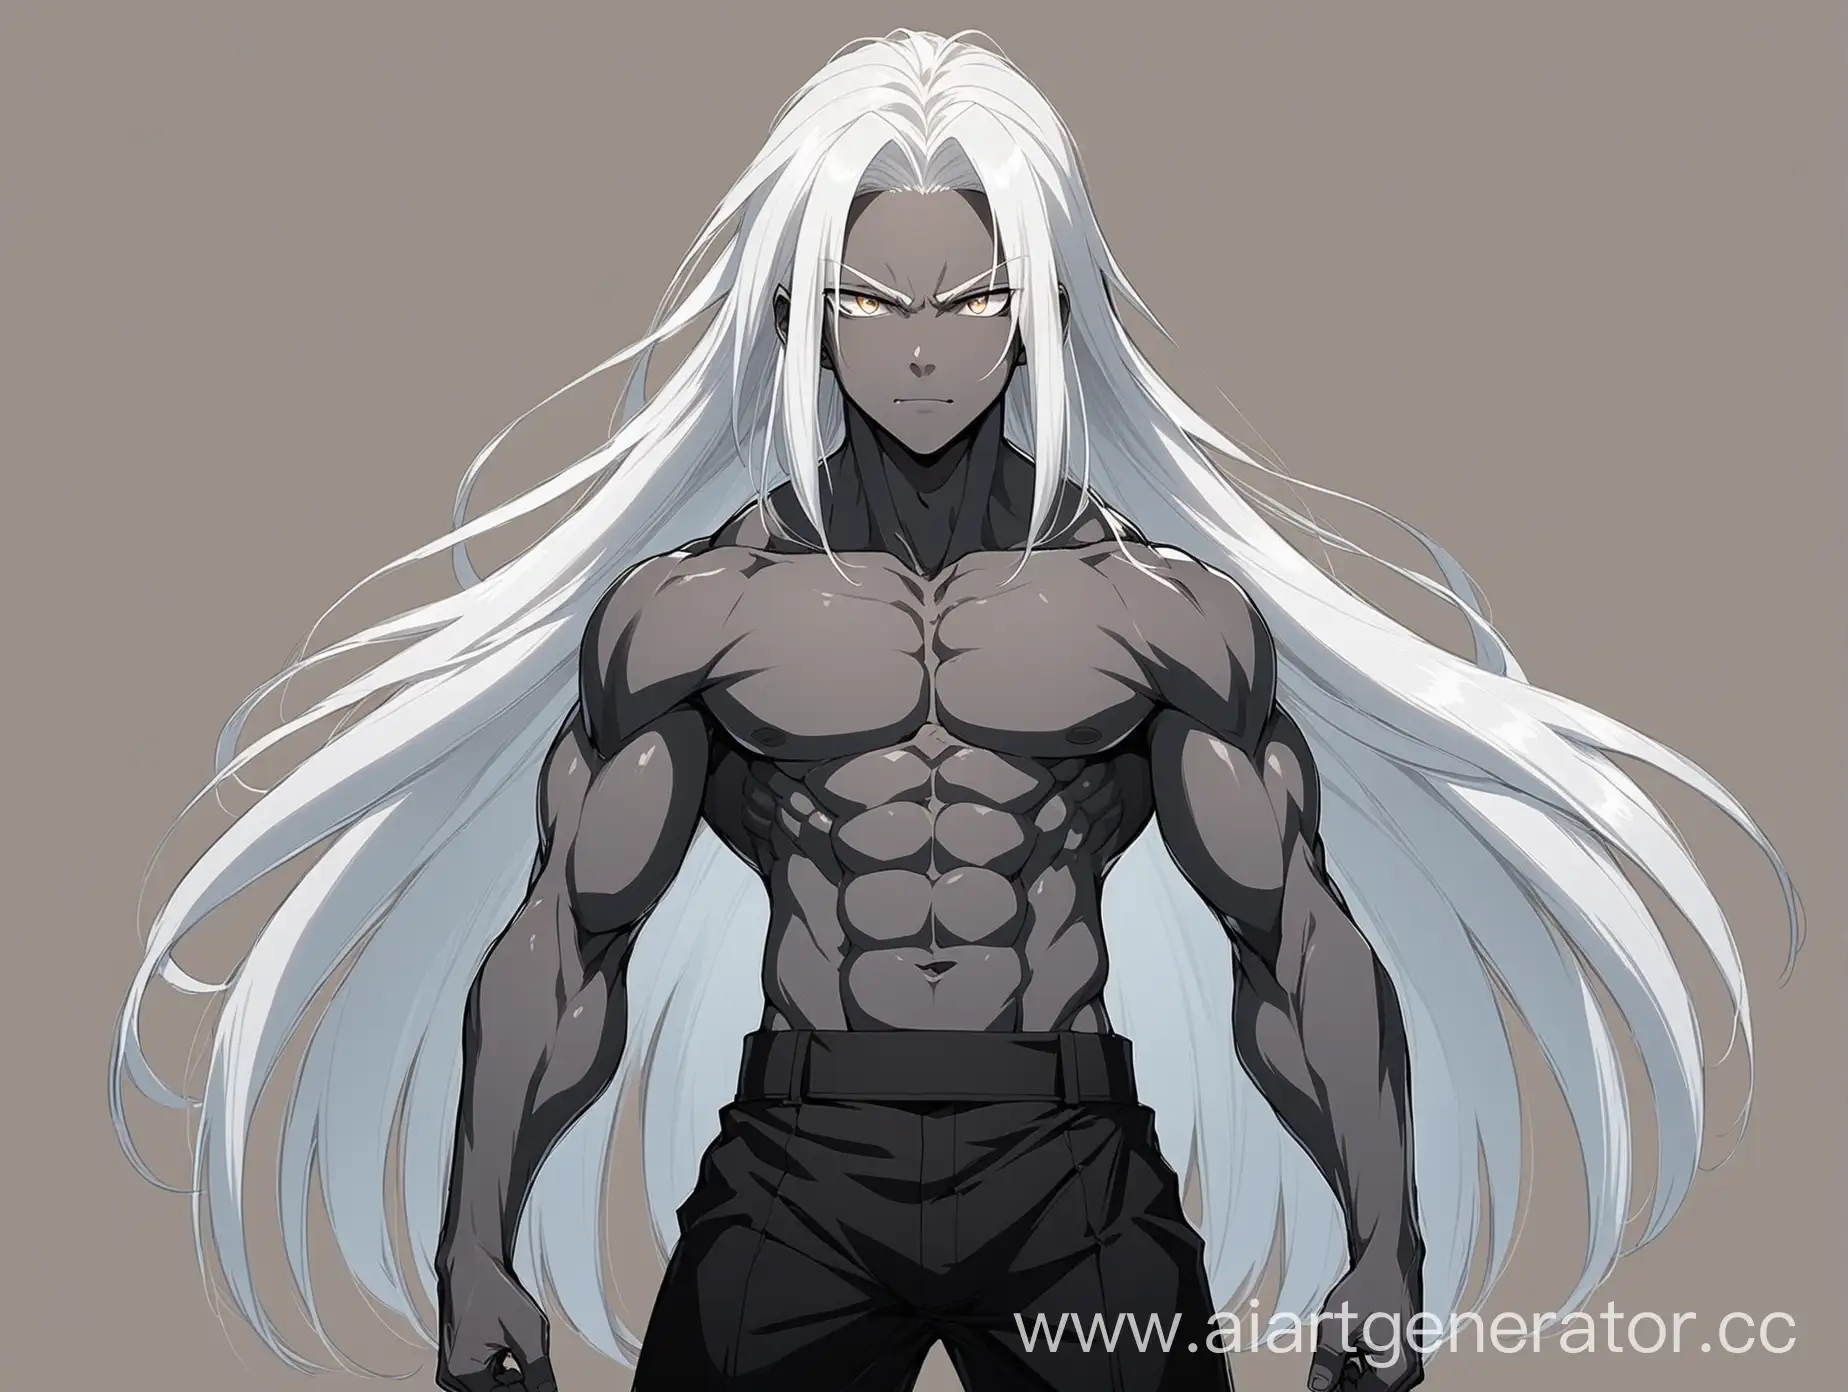 A boy with a gray skin tone, long white hair and a strong build, full-length anime style